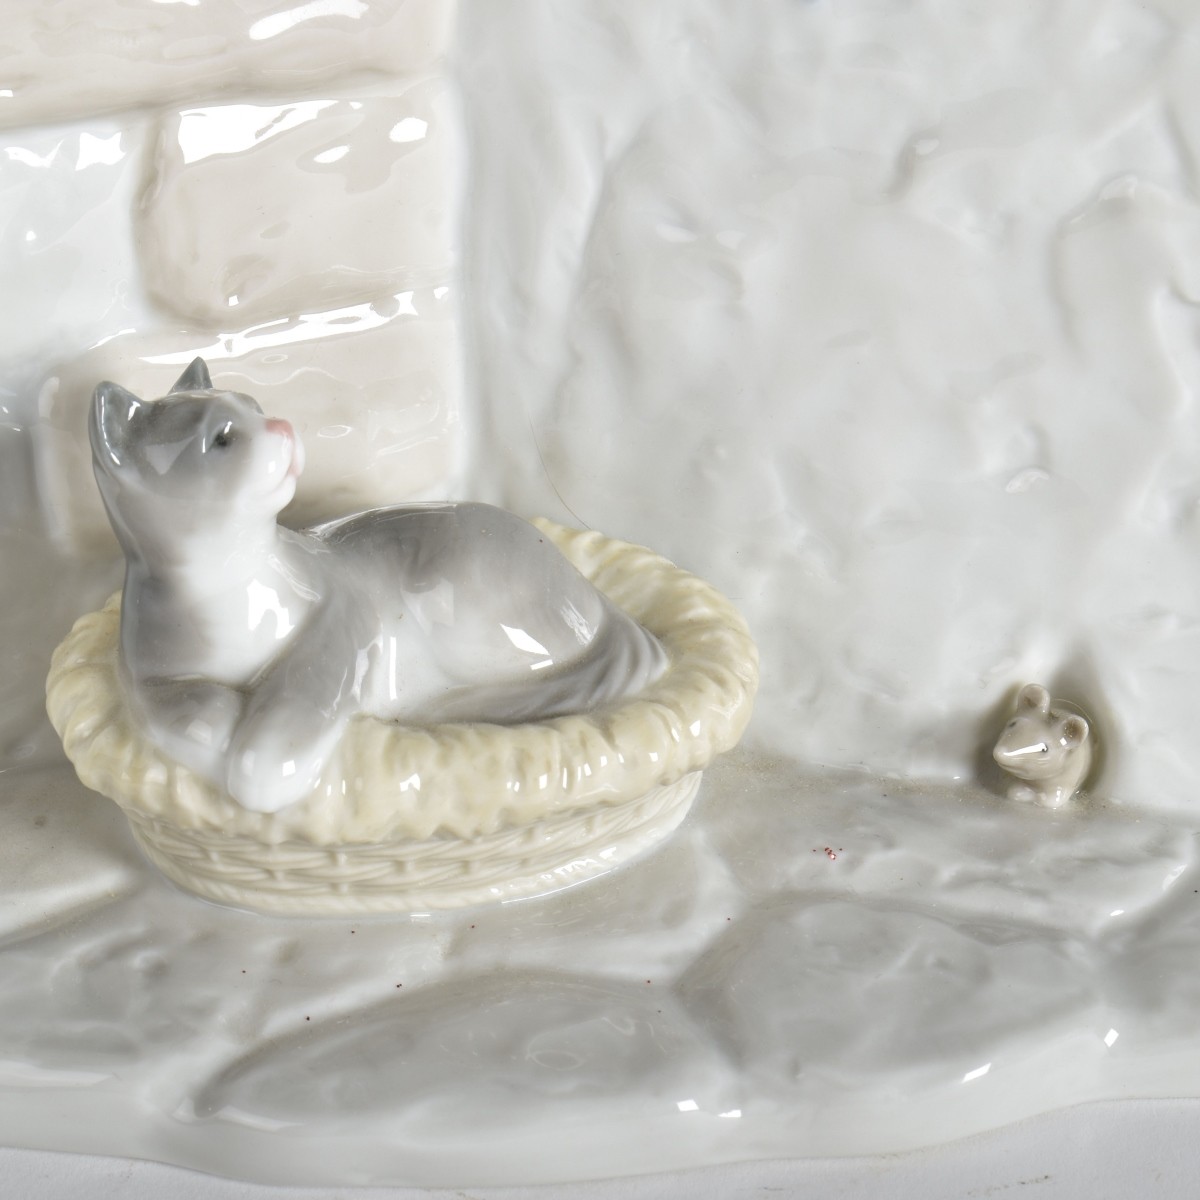 Lladro "It's Almost Time" Figurine